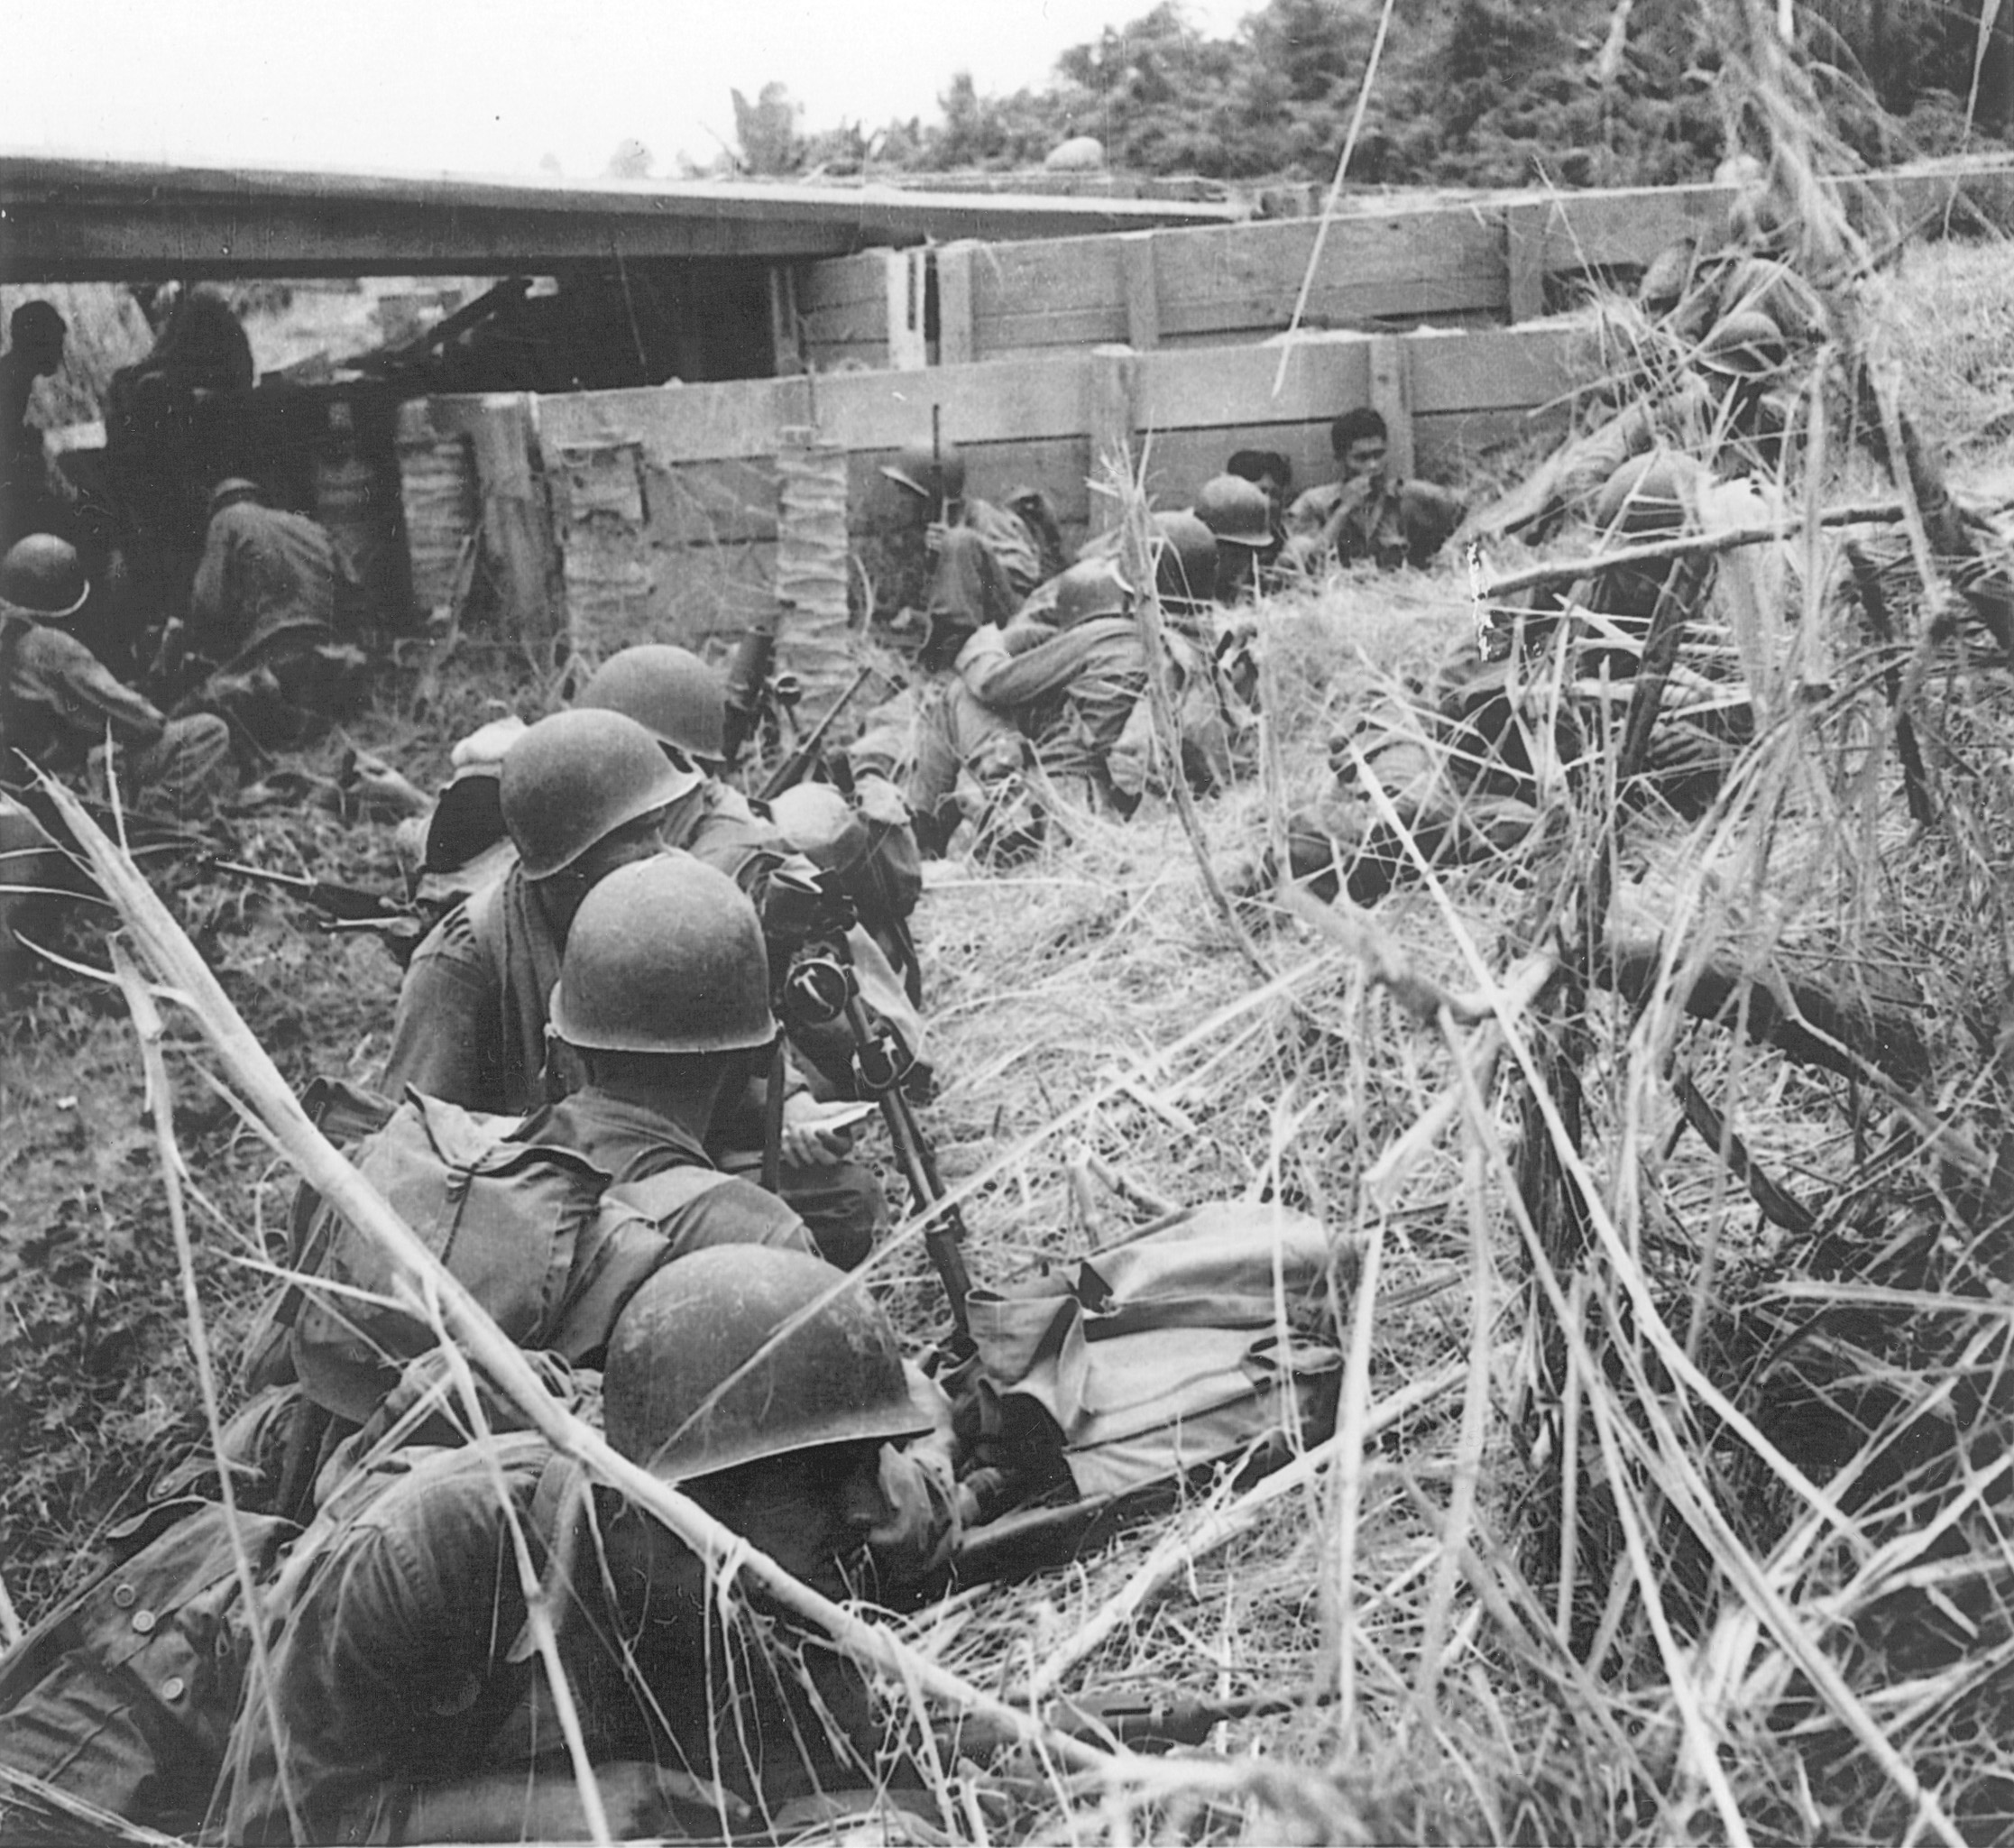 As artillery shells begin to fall, 24th Division soldiers take cover along the National Highway, a road leading into Davao, Philippines.